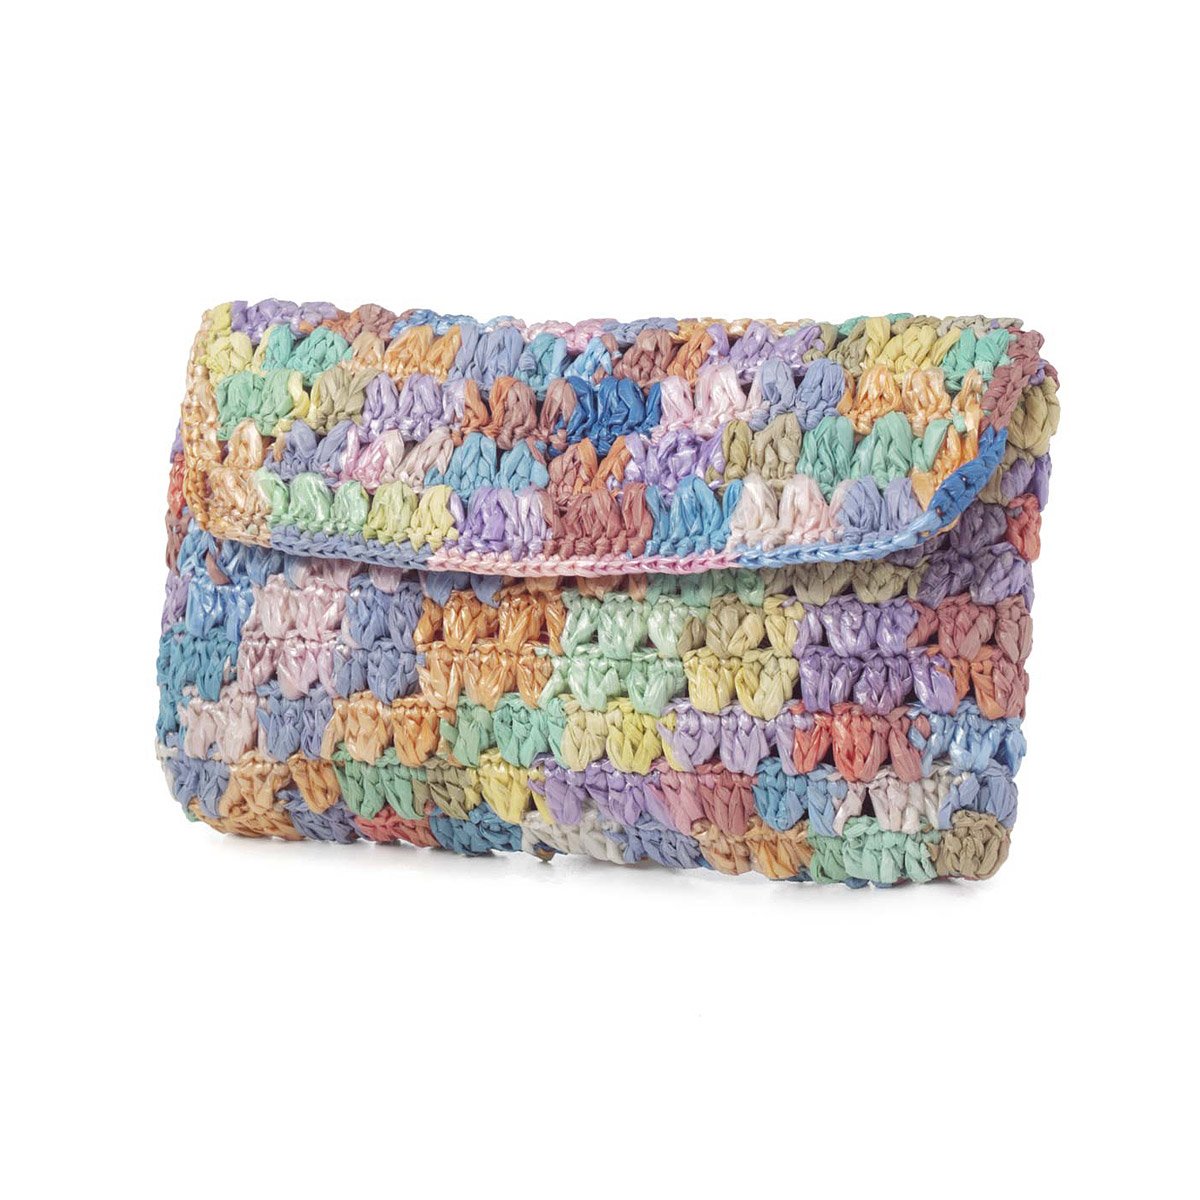 Recycled Plastic Bag Clutch | Purse, Clutch, Reclaimed, Shopping Bags | UncommonGoods